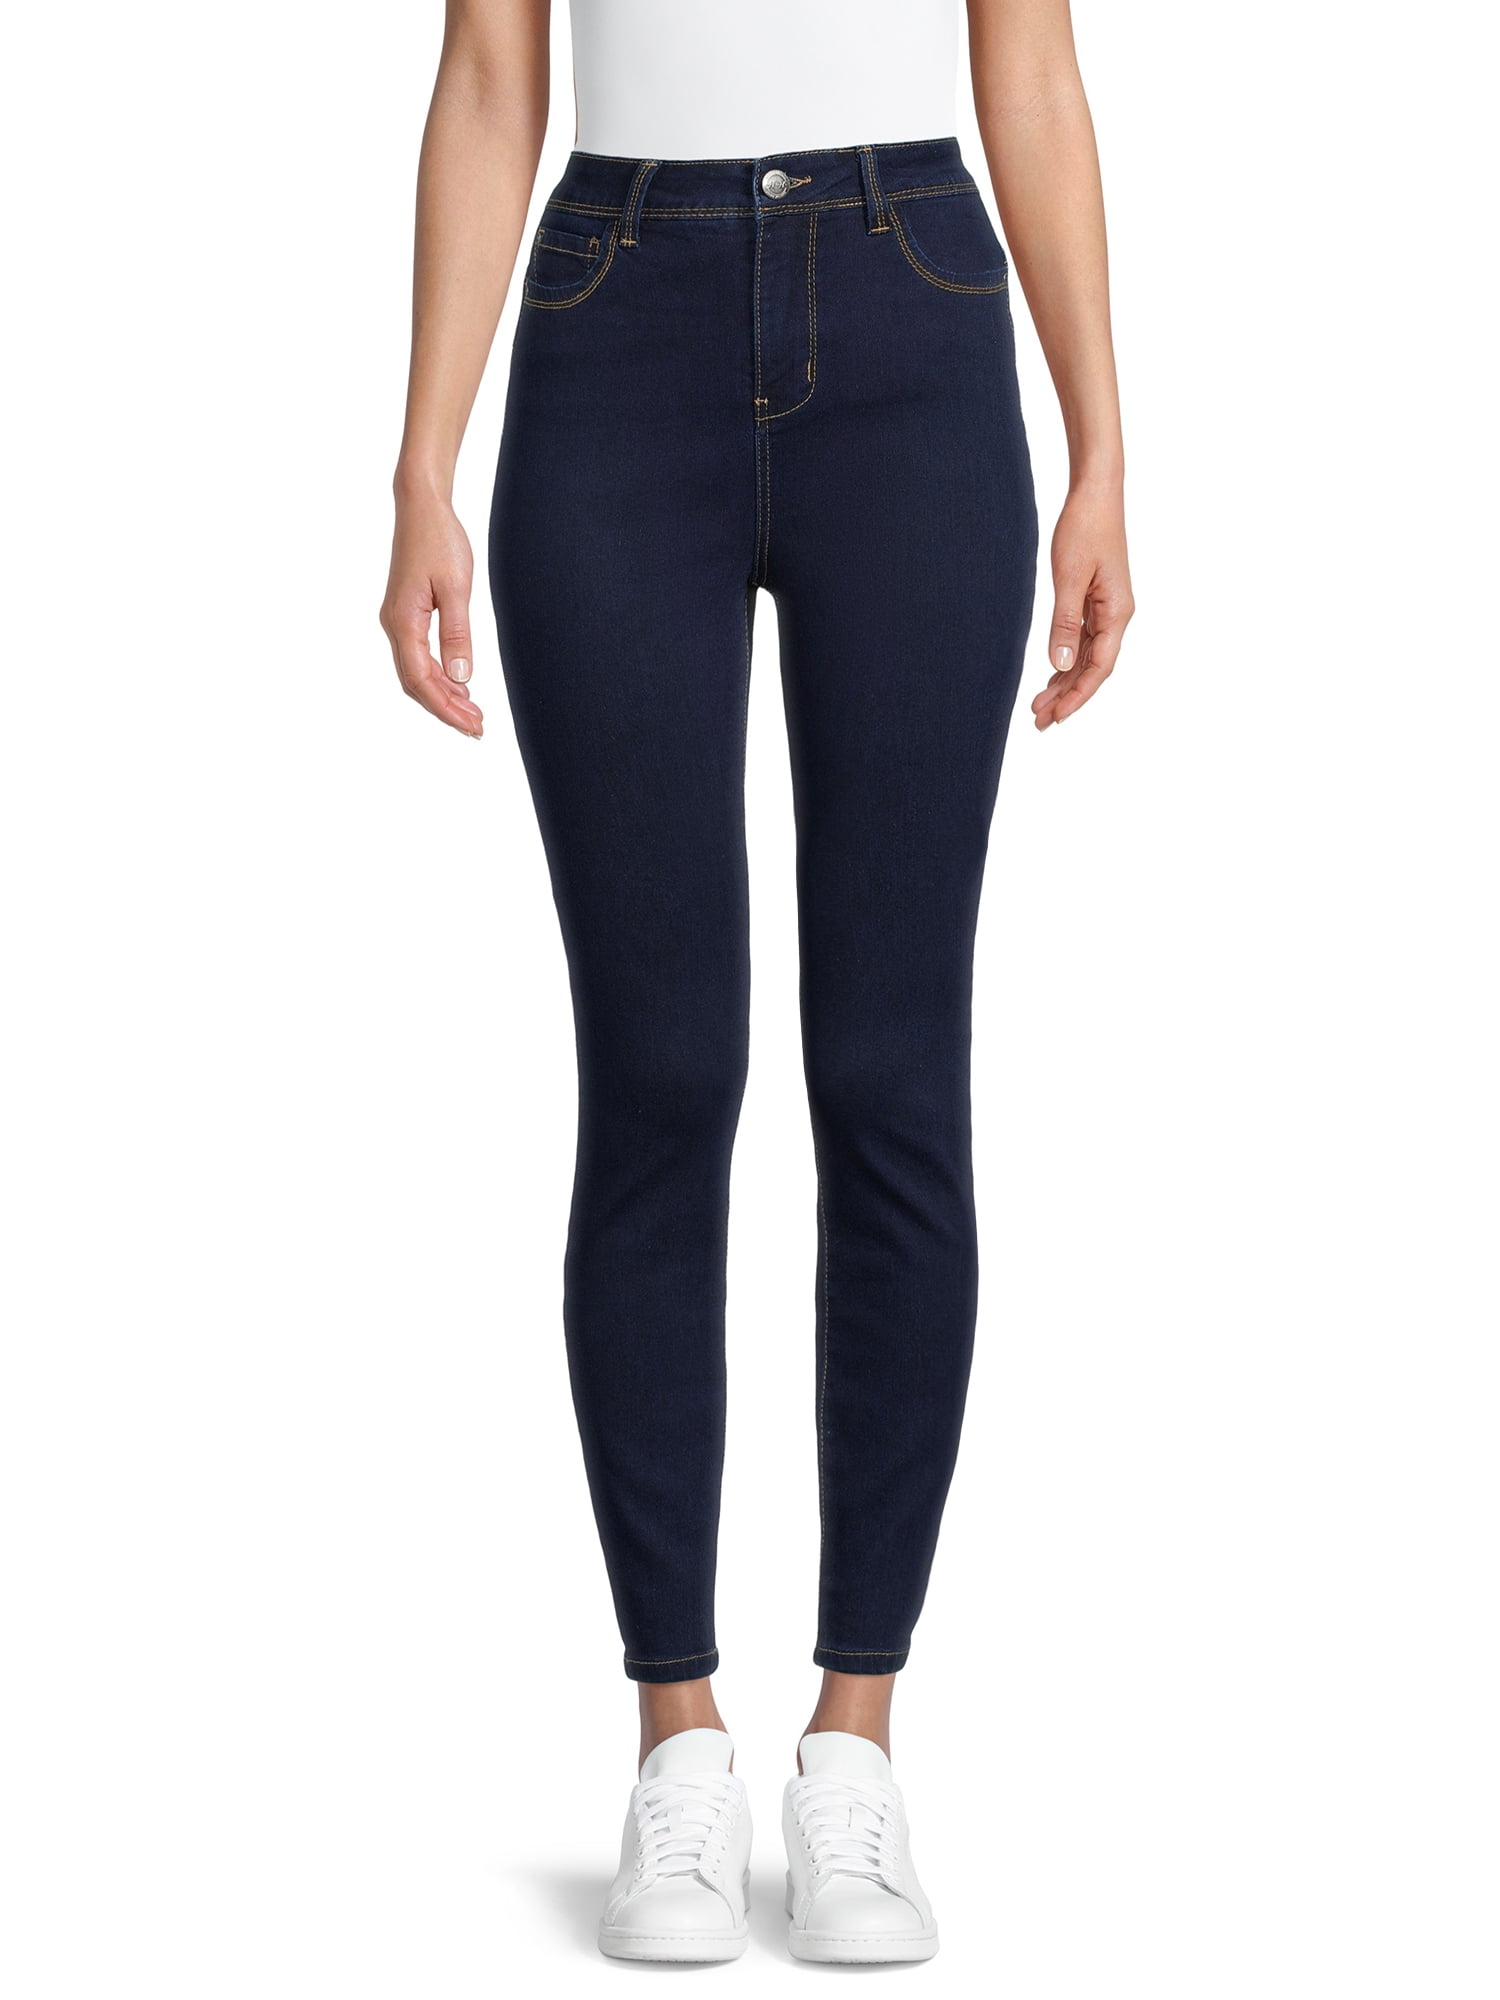 Harmony & Havoc Women's Contour and Lift High Rise Skinny Jeans ...